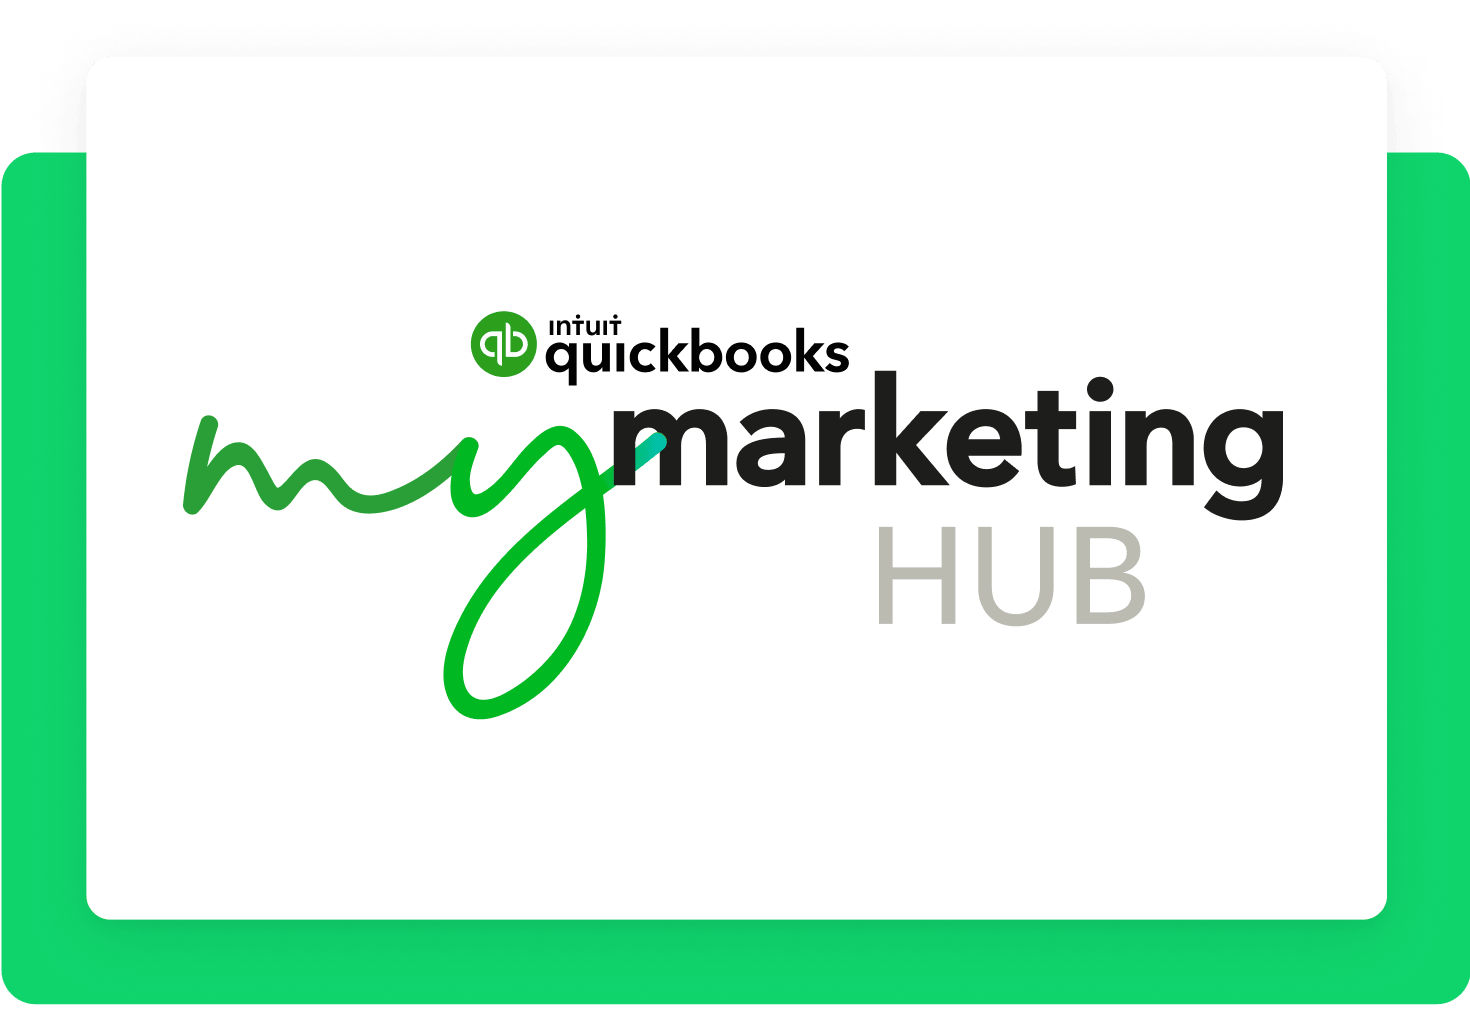 Be ready for MTD for VAT with QuickBooks